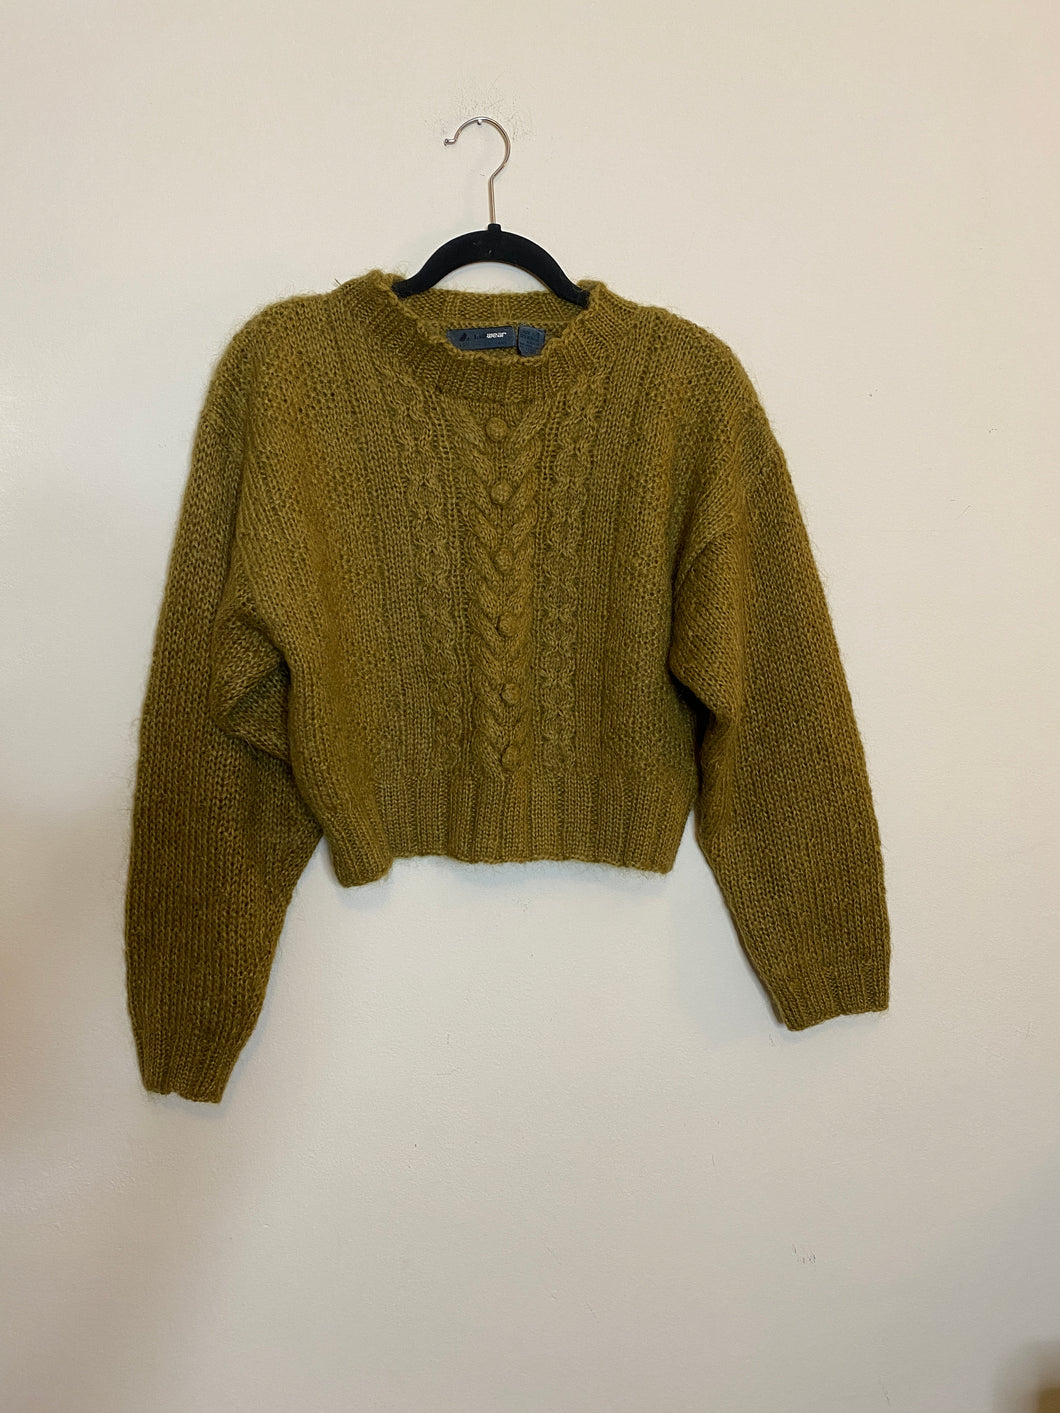 Vintage Cropped Green Wool Sweater - S/M/L/XL